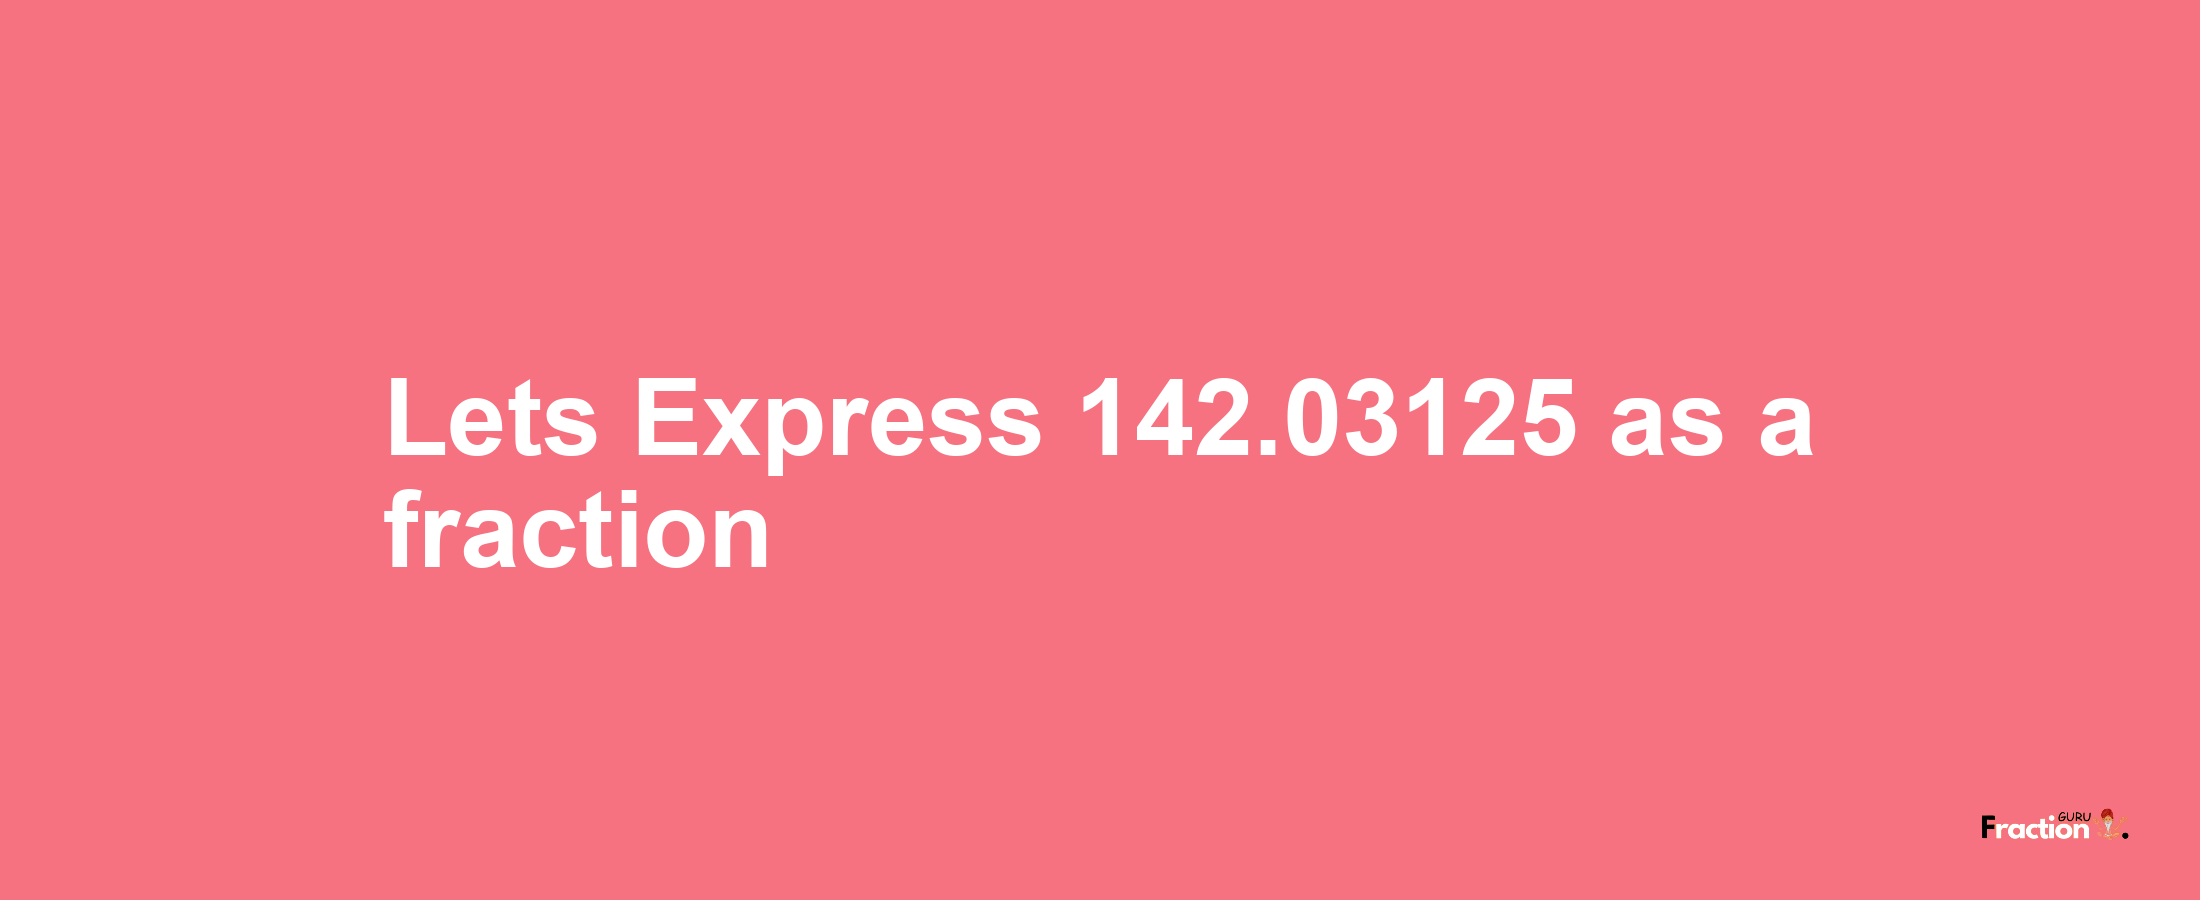 Lets Express 142.03125 as afraction